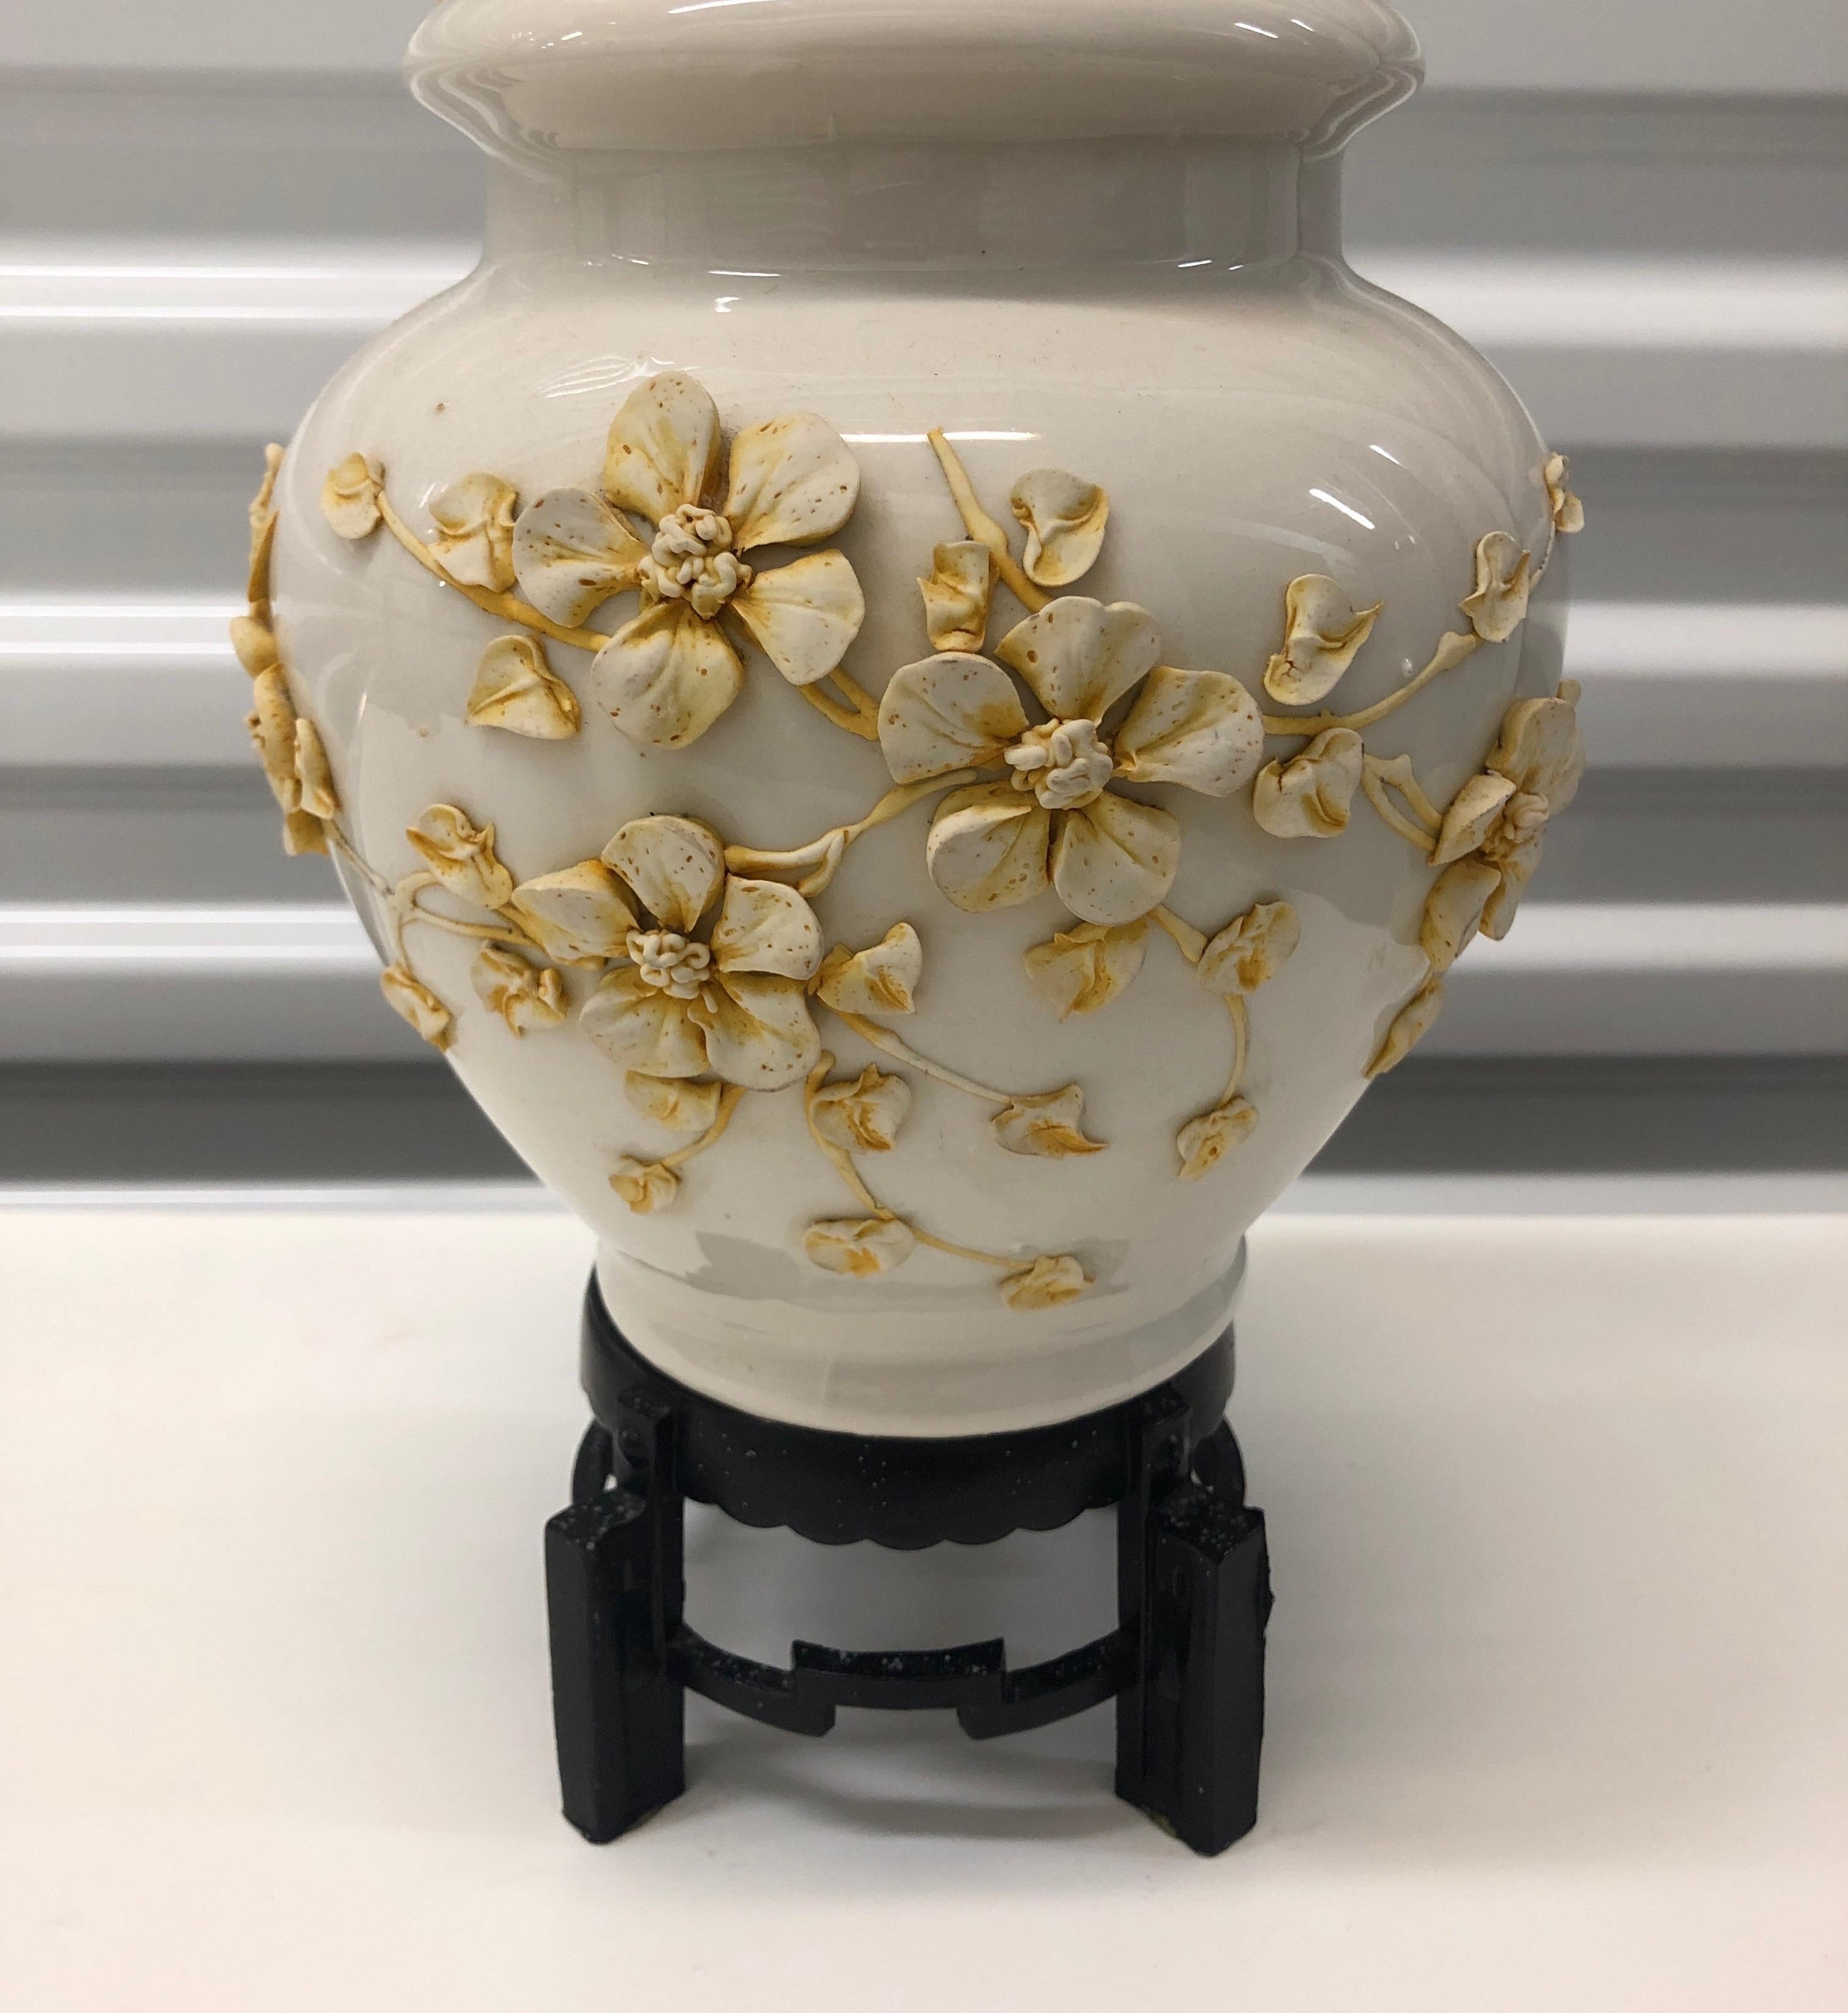 Chinese bisque ceramic lamp.
Floral relief ceramic lamp. Ginger jar shape with traditional Chinese iron base. Brass fittings.
Original ebonized wood finial, 1940s. No lamp shade!
Note: No chips on floral relief. No shade available. Cream color